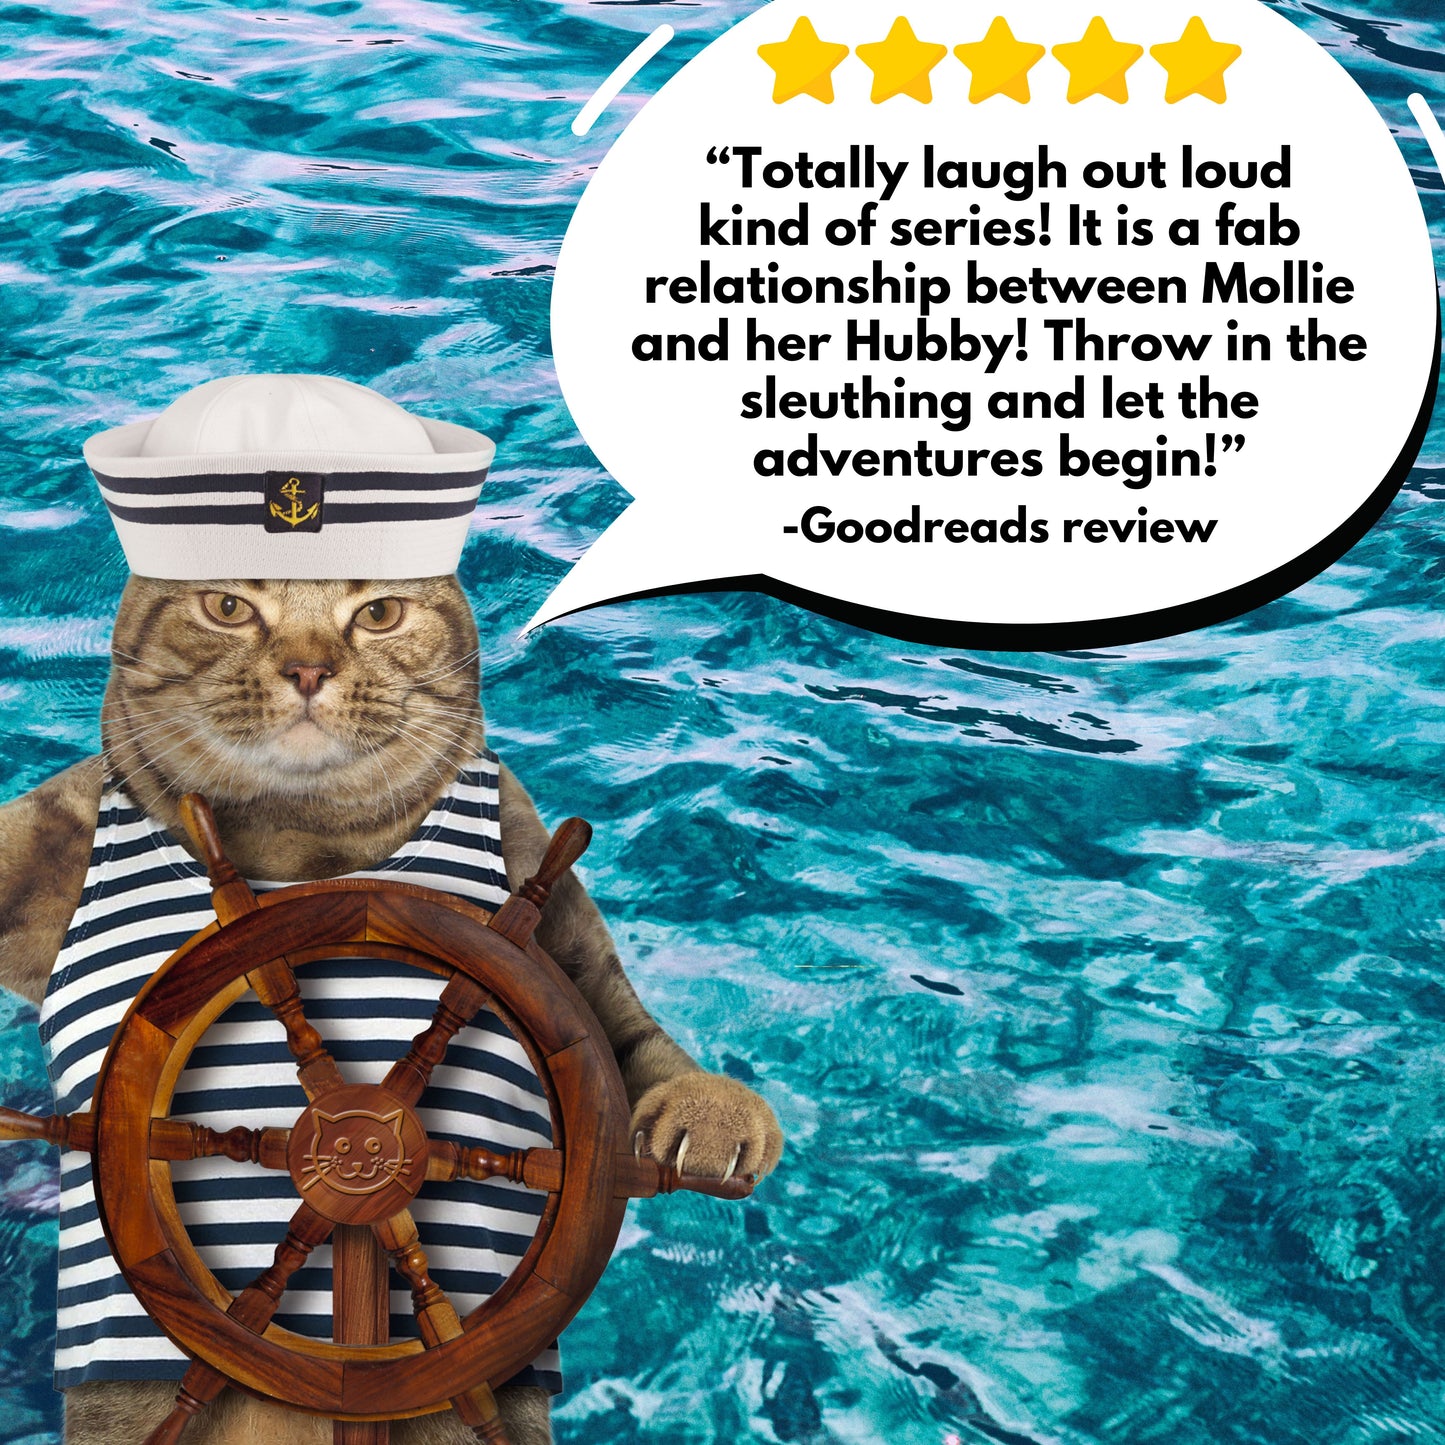 5 Star Review of the Mollie McGhie cozy mystery series with a funny nautical cat